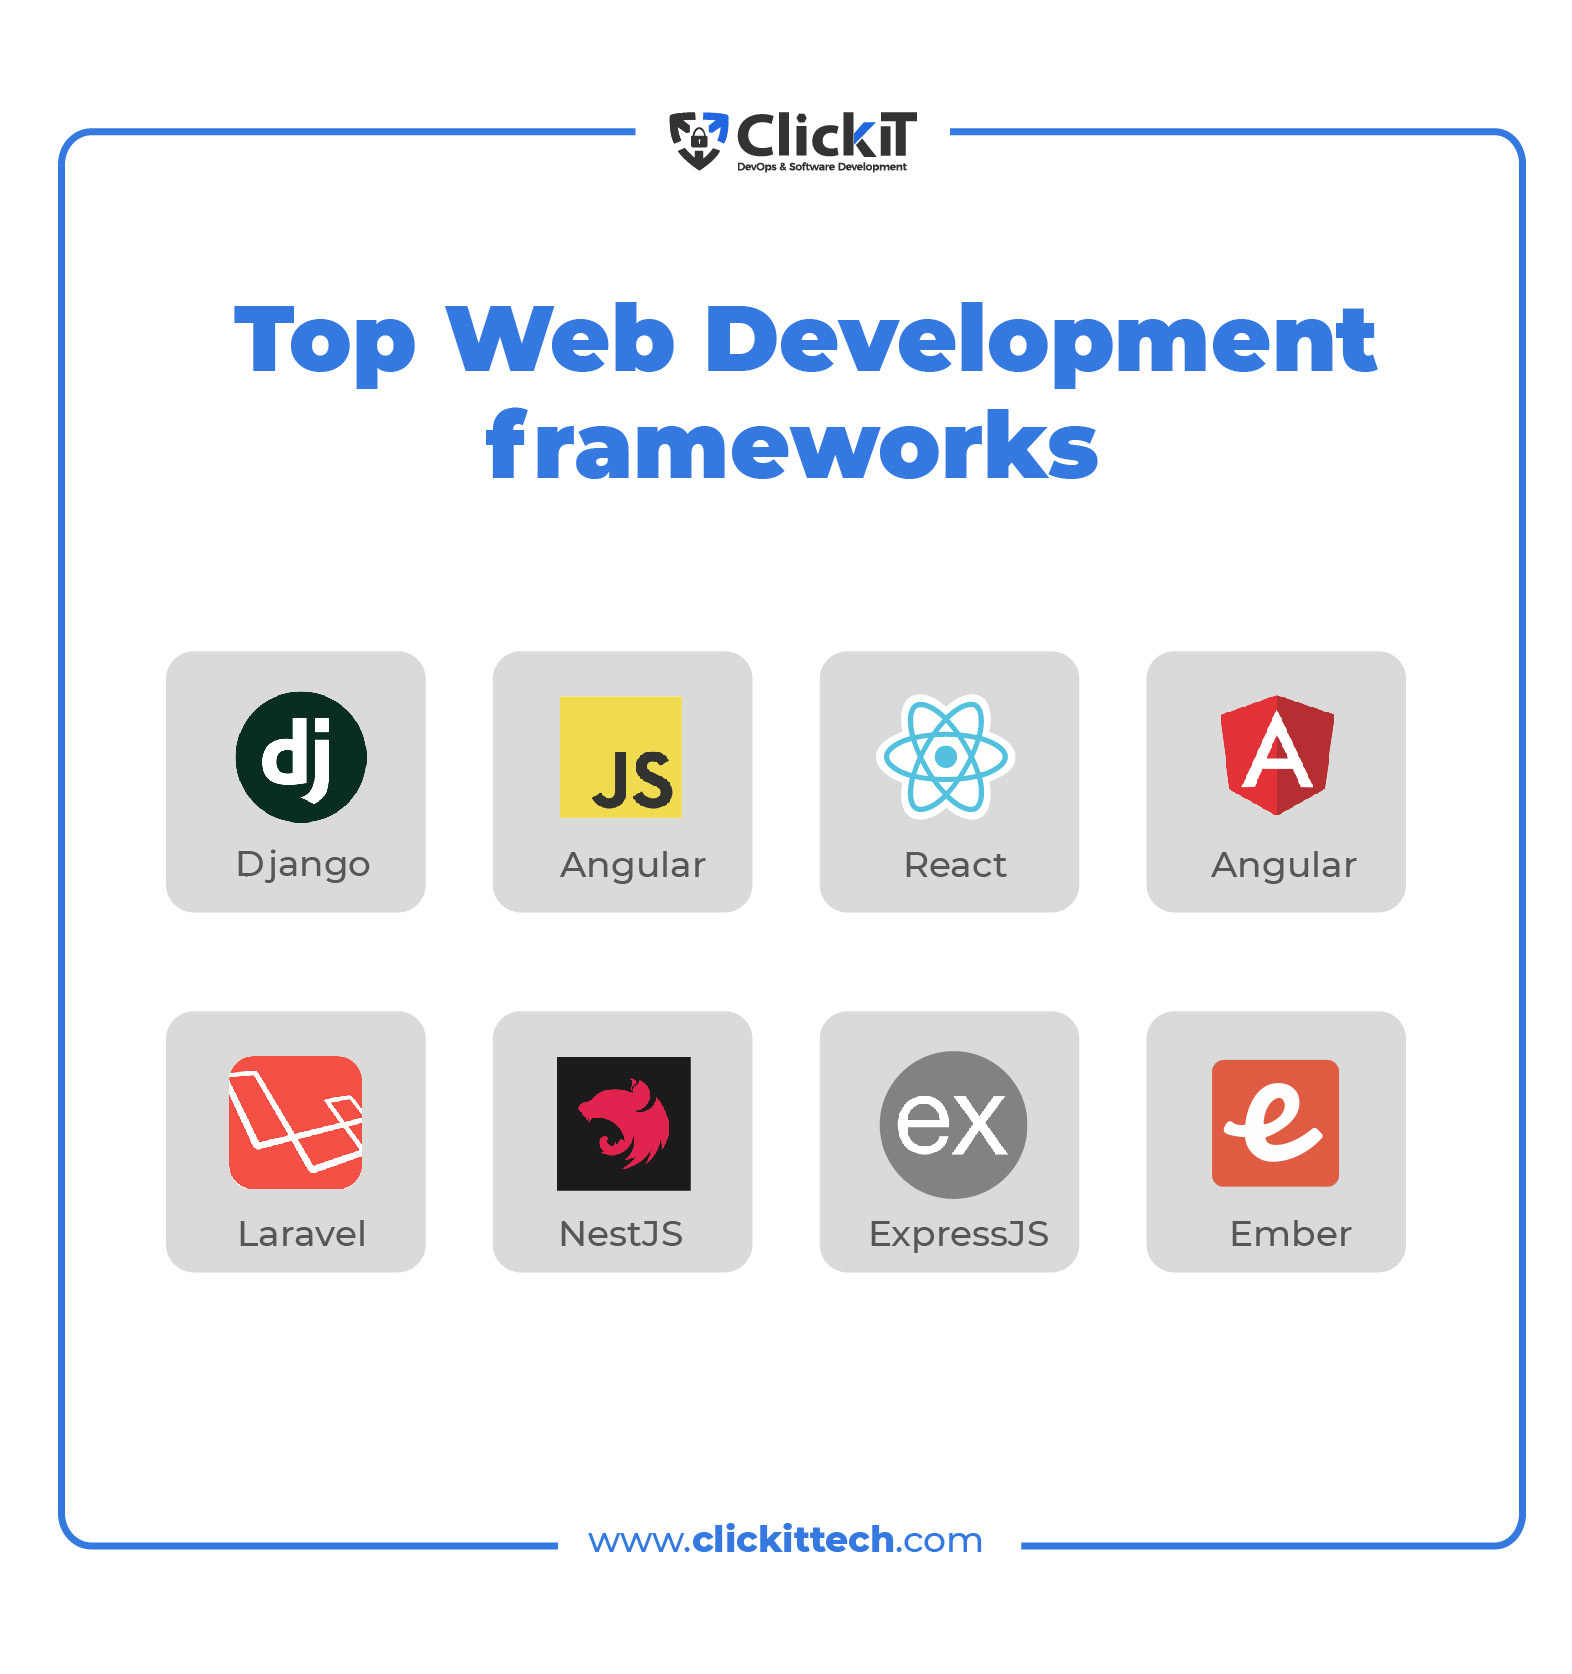 Web Development Frameworks The Top 8 for your Next Project